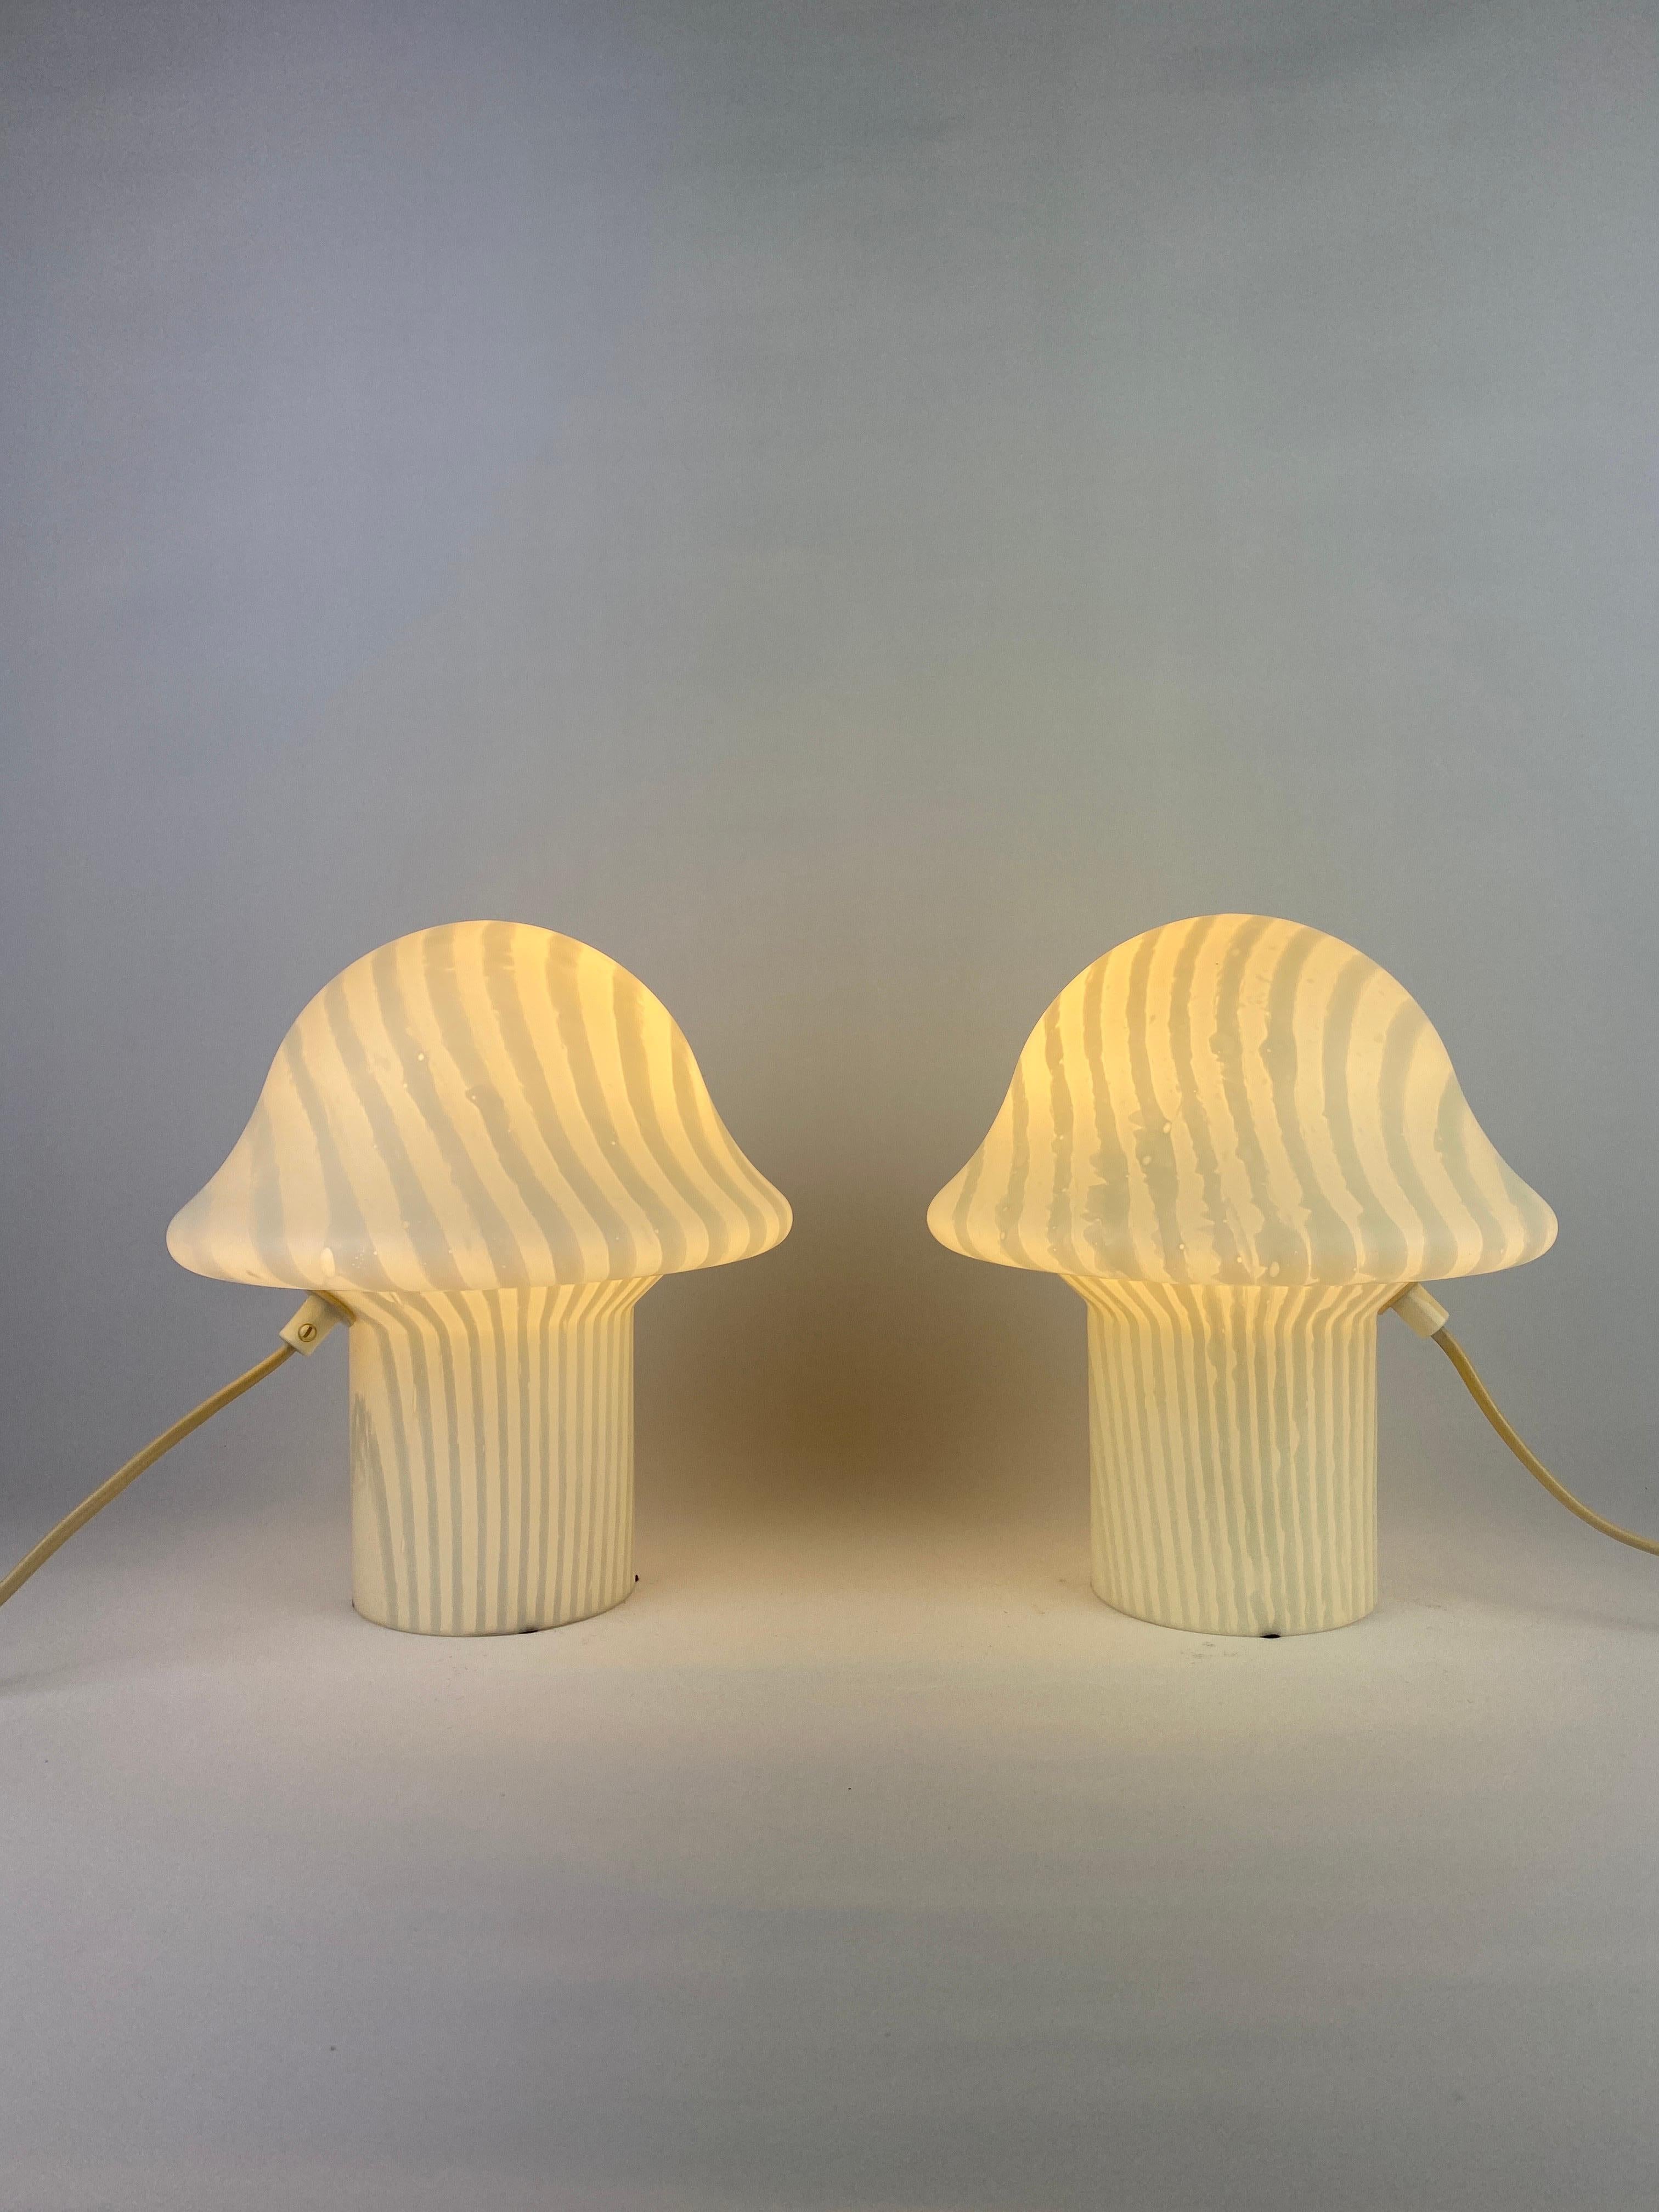 Beautiful German design by Peill and Putzler, produced around 1970 - 1980.

This lamp is made of one mouth-blown piece of crystal glass with a striped zebra print and it's shaped like a typical mid-century mushroom. The lamp is placed directly on